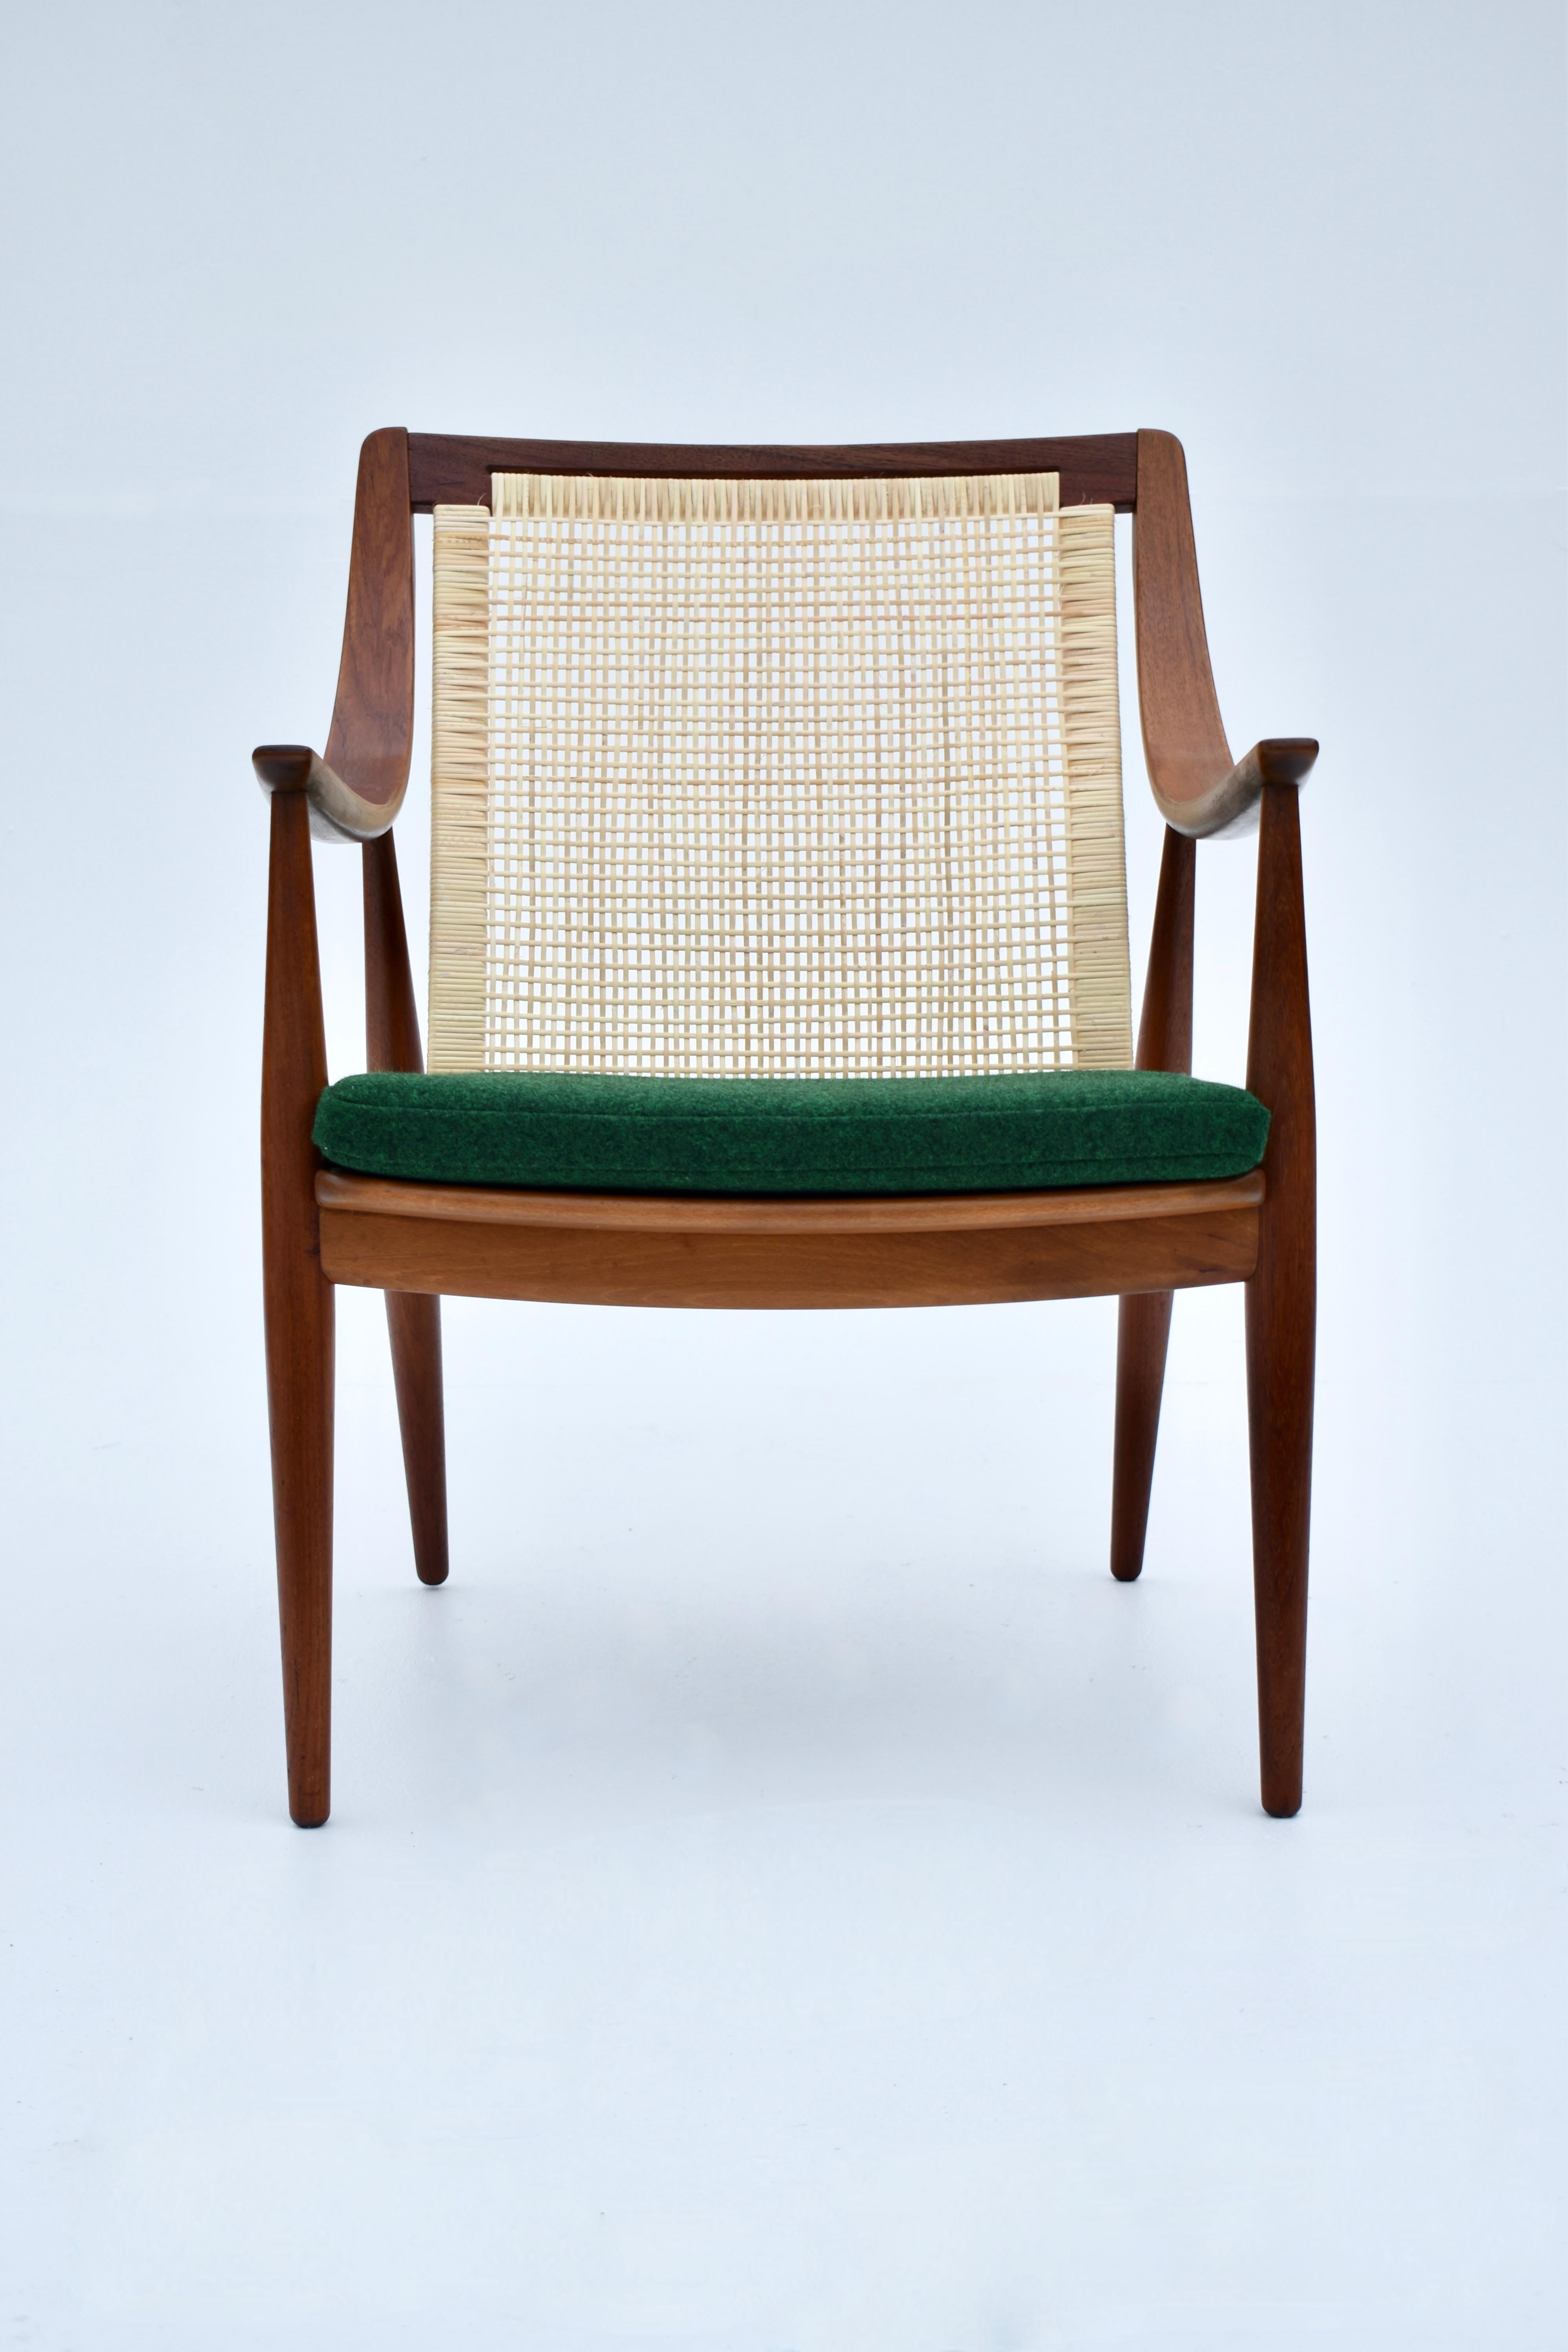 One of our all time favourite designs, the model 147 chair designed by Peter Hvidt & Orla Molgaard Nielsen is one of the most graceful Danish Modern chairs. A combination of the very expressive fluid lines of the frame with the rattan backrest